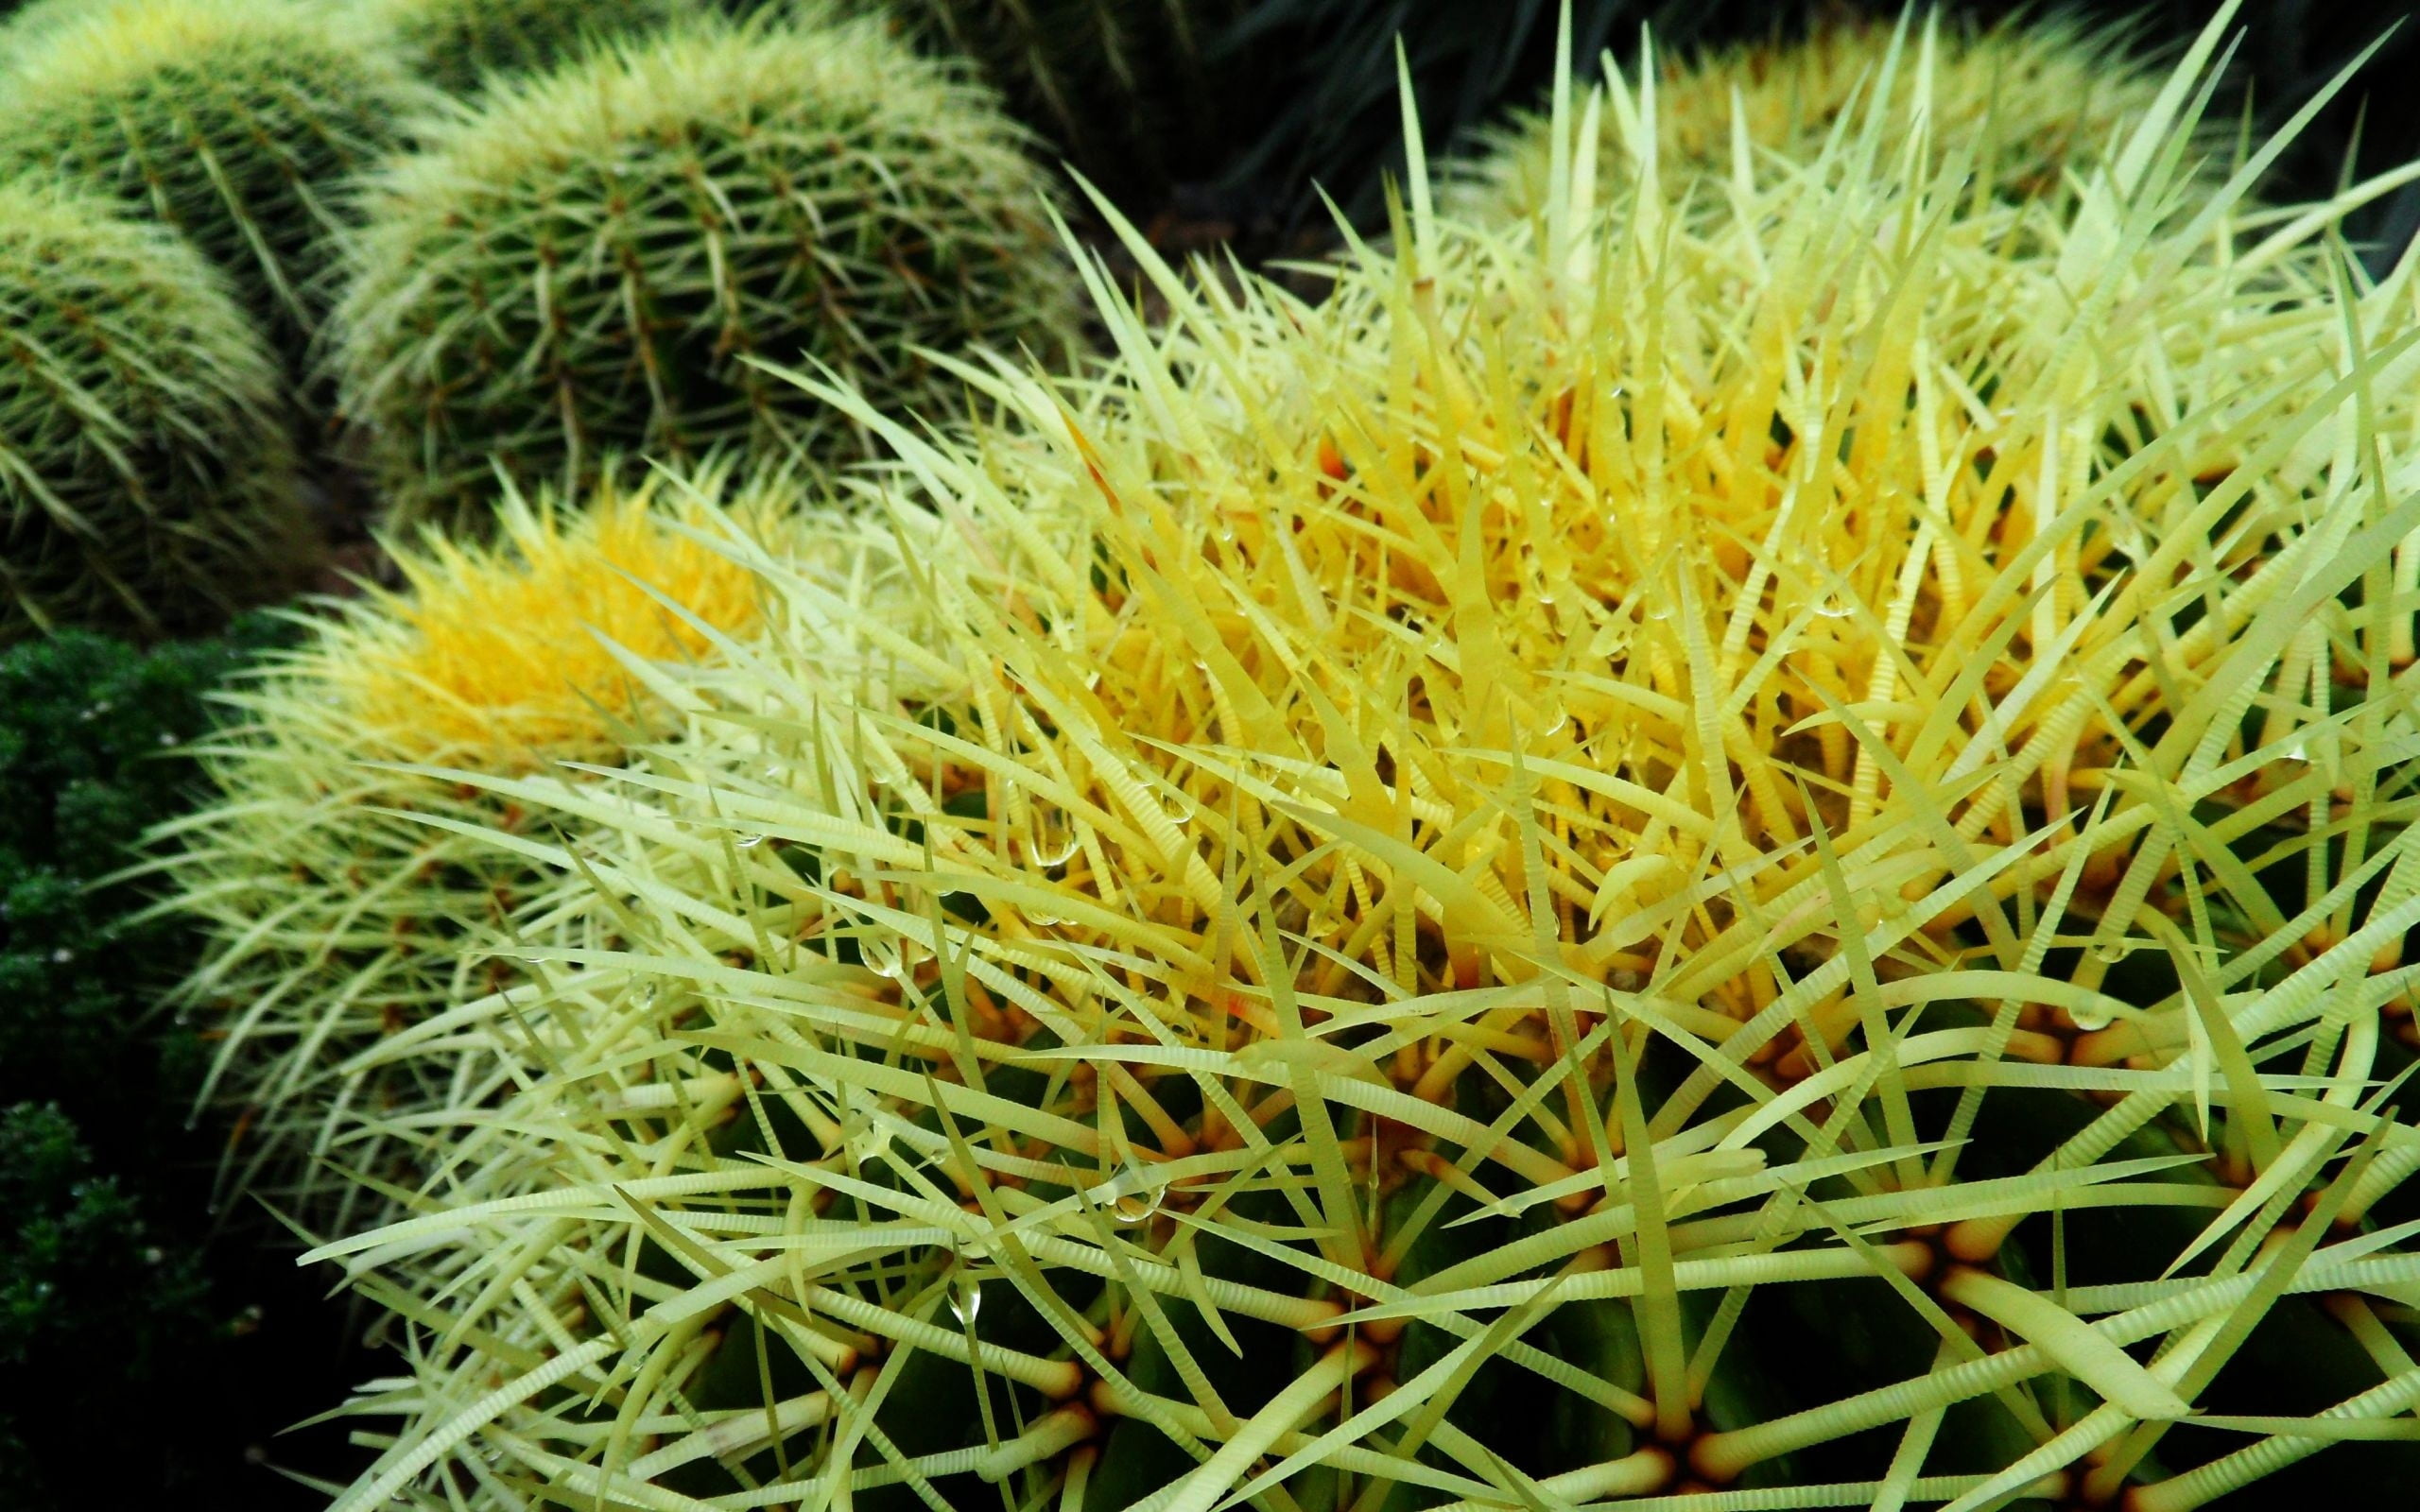 green sea urchin, cactus, flowers, thorns, plant, nature, close-up